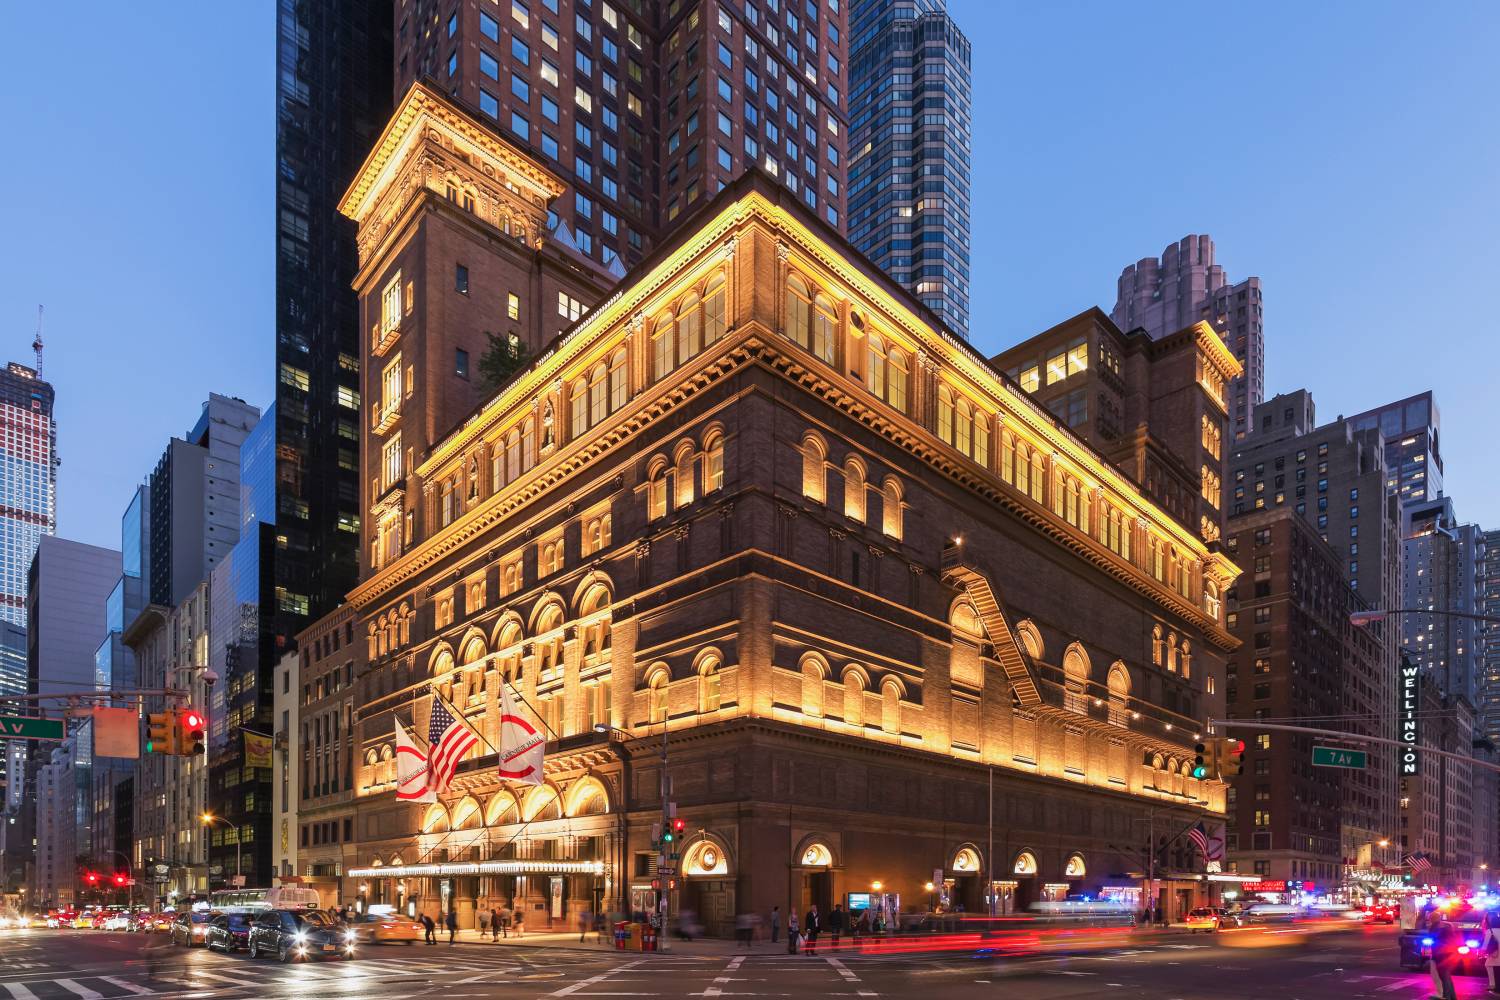 Orchestra of St. Luke's at Carnegie Hall